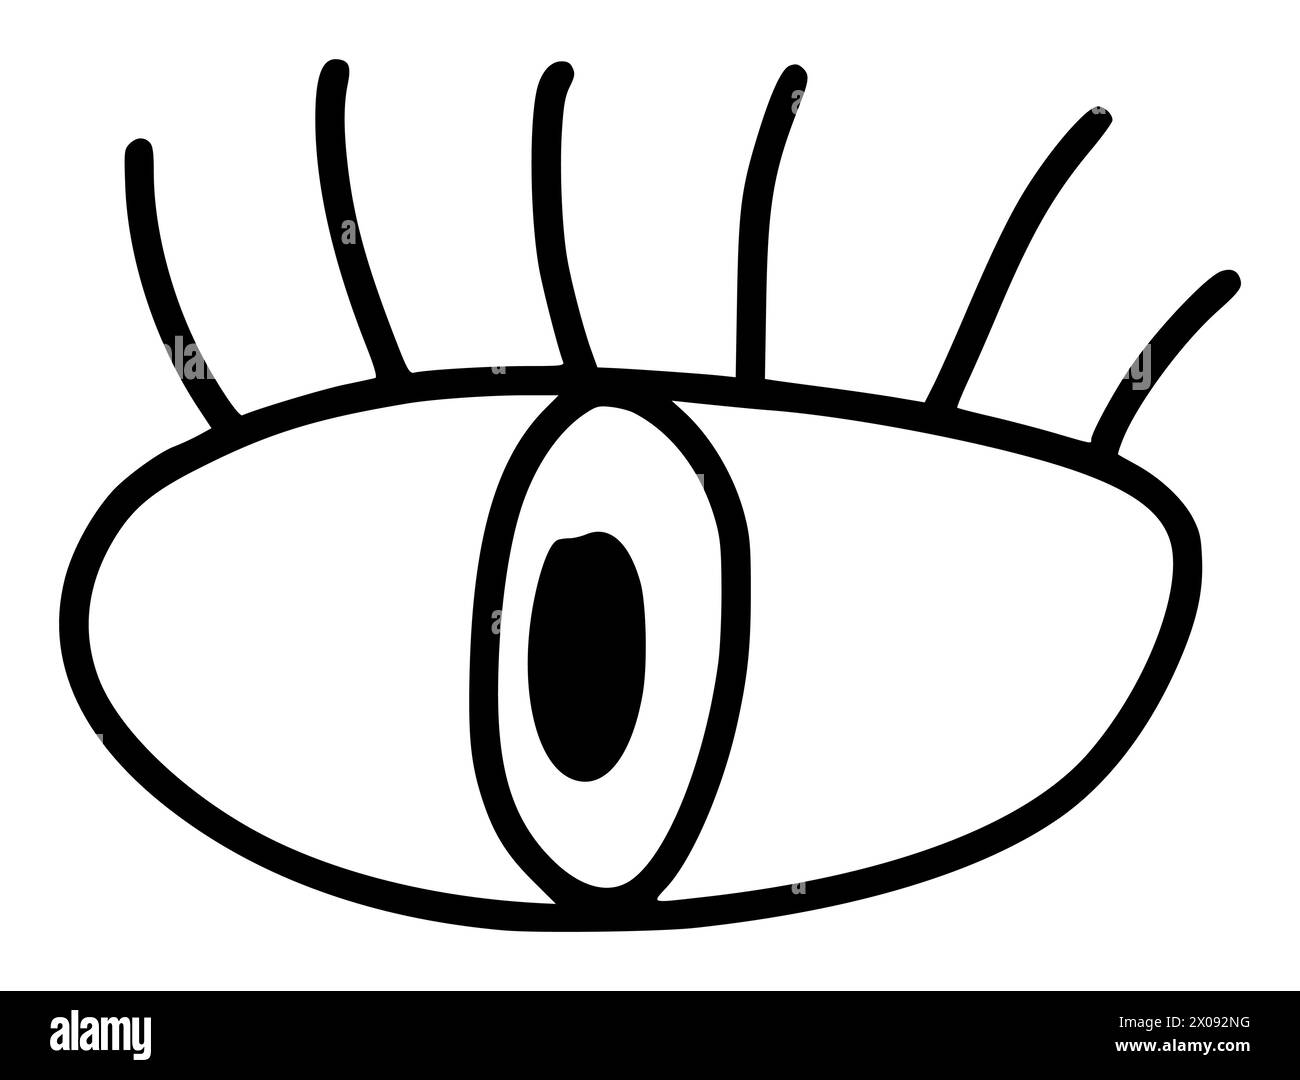 Hand drawn eye icon in simple doodle style logo. Open black eye with lines. Monochrome design Stock Vector